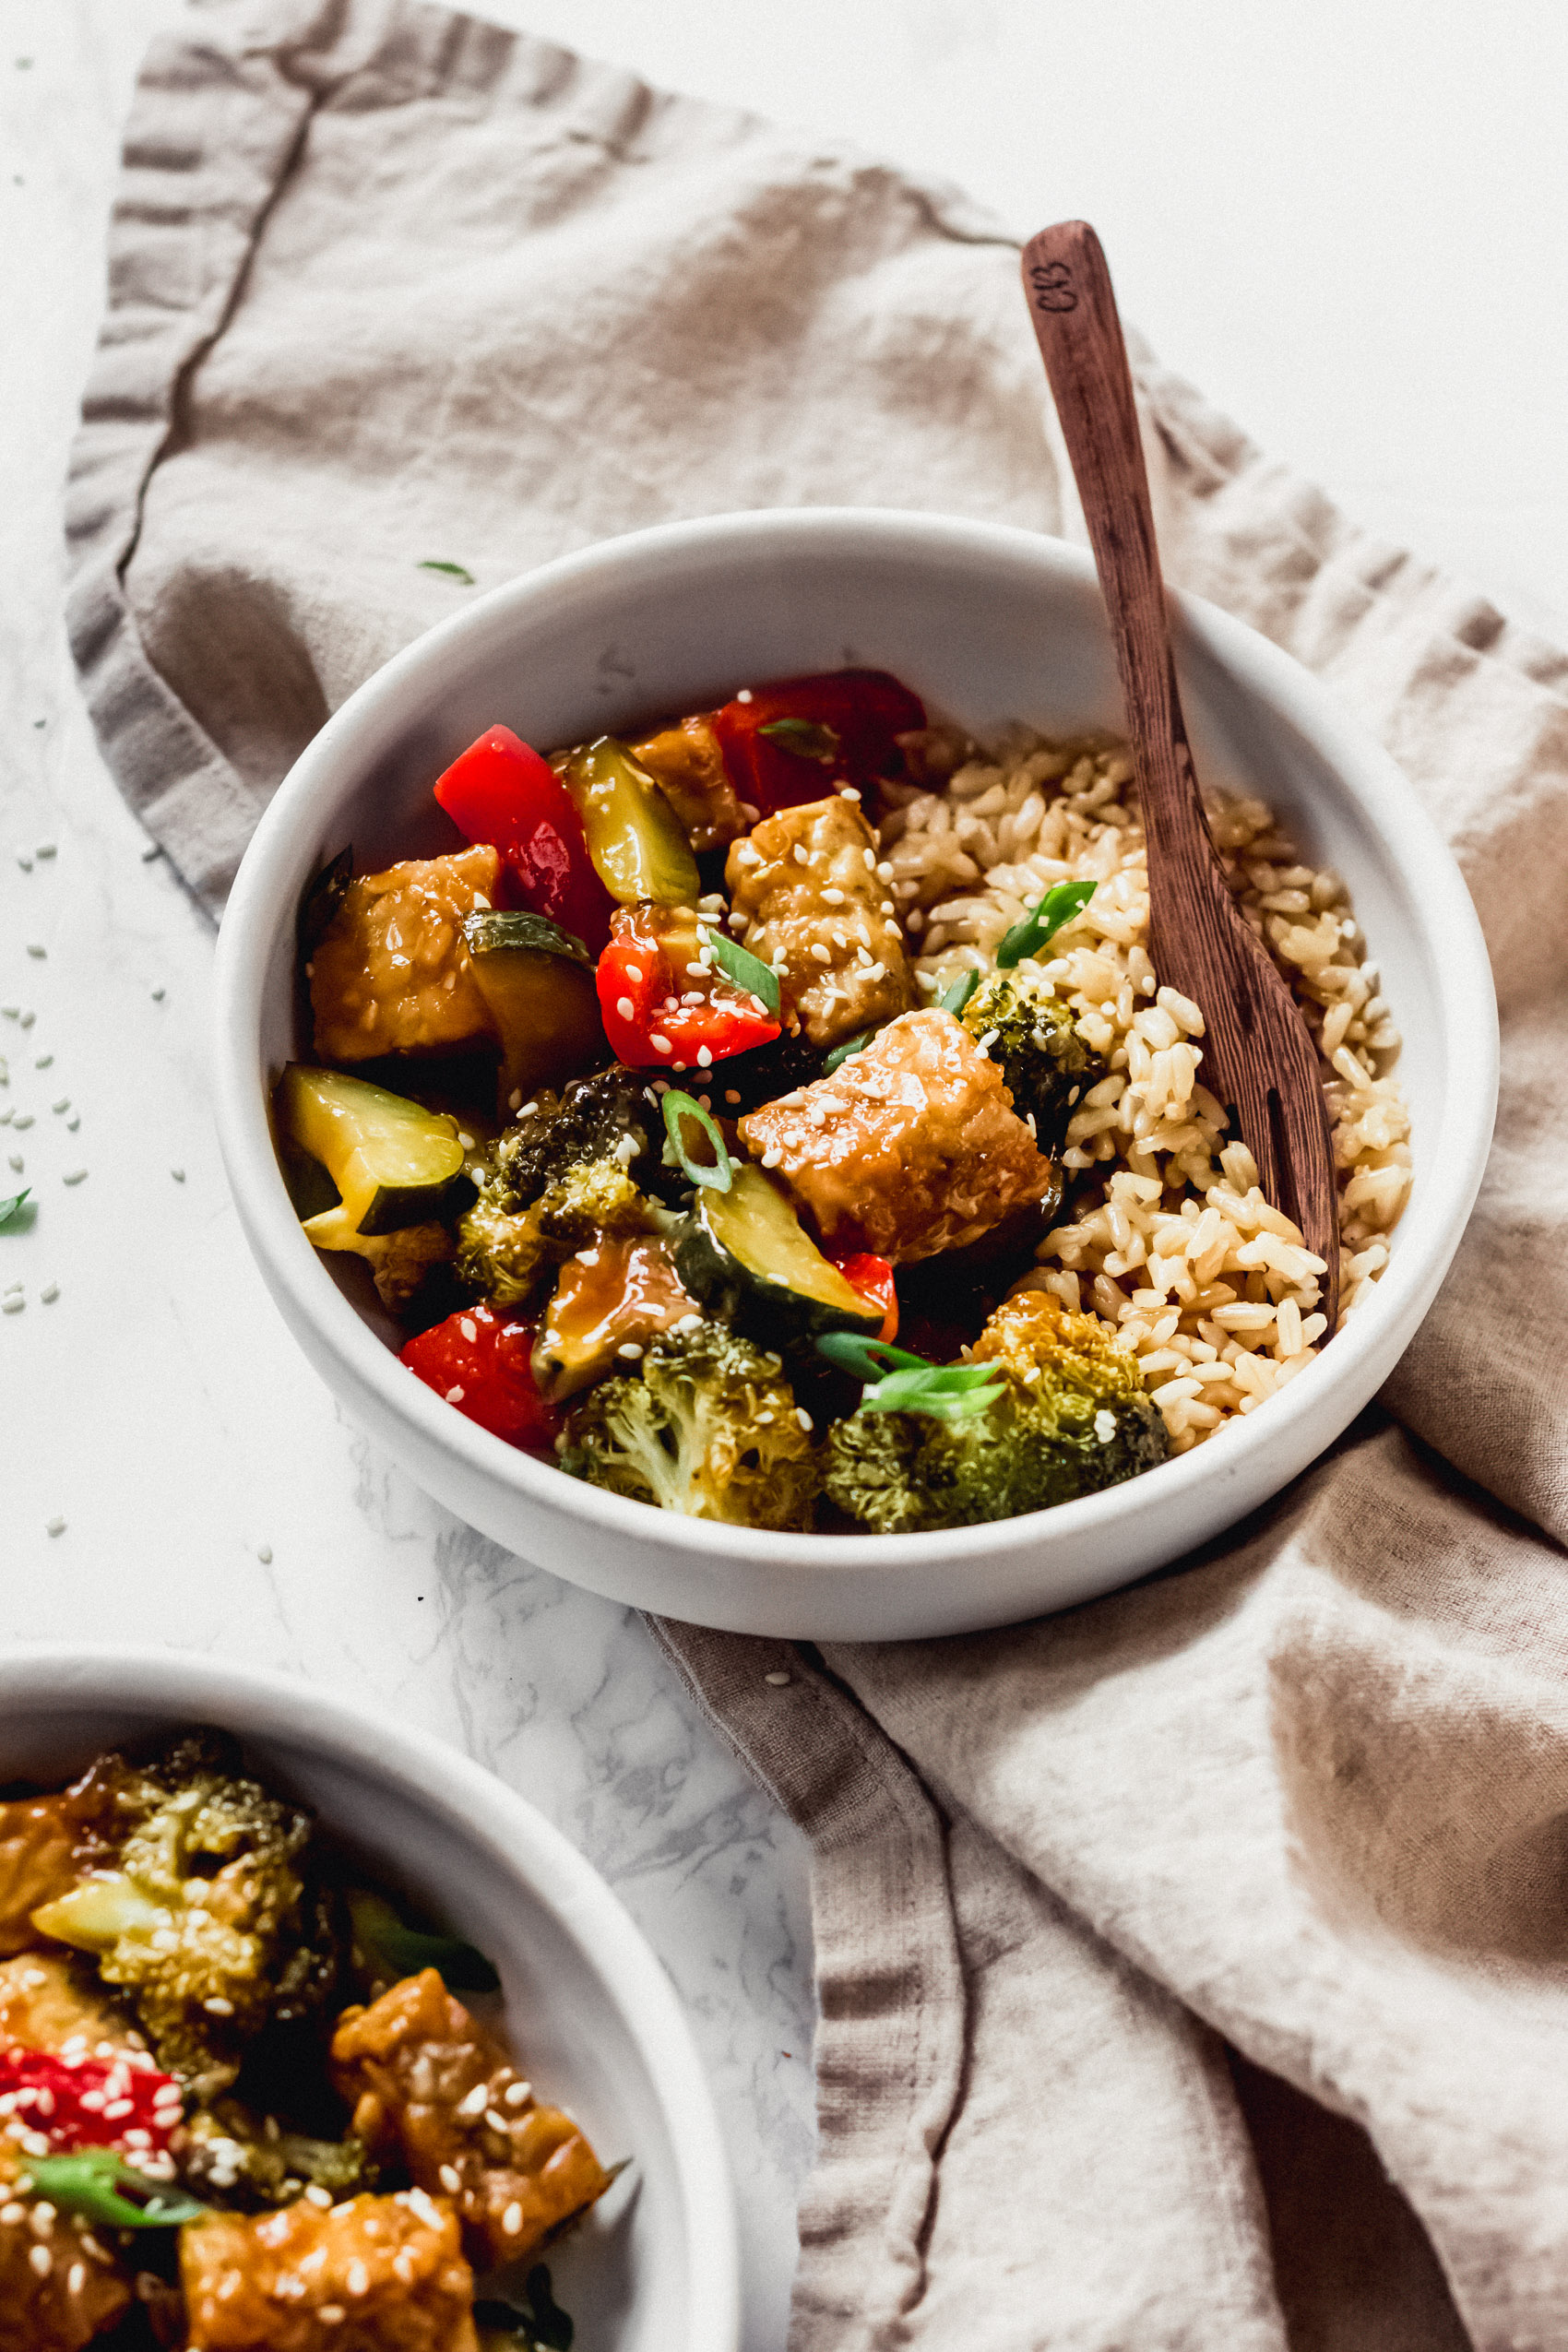 a bowl of stir fried tempeh and veggies served over brown rice